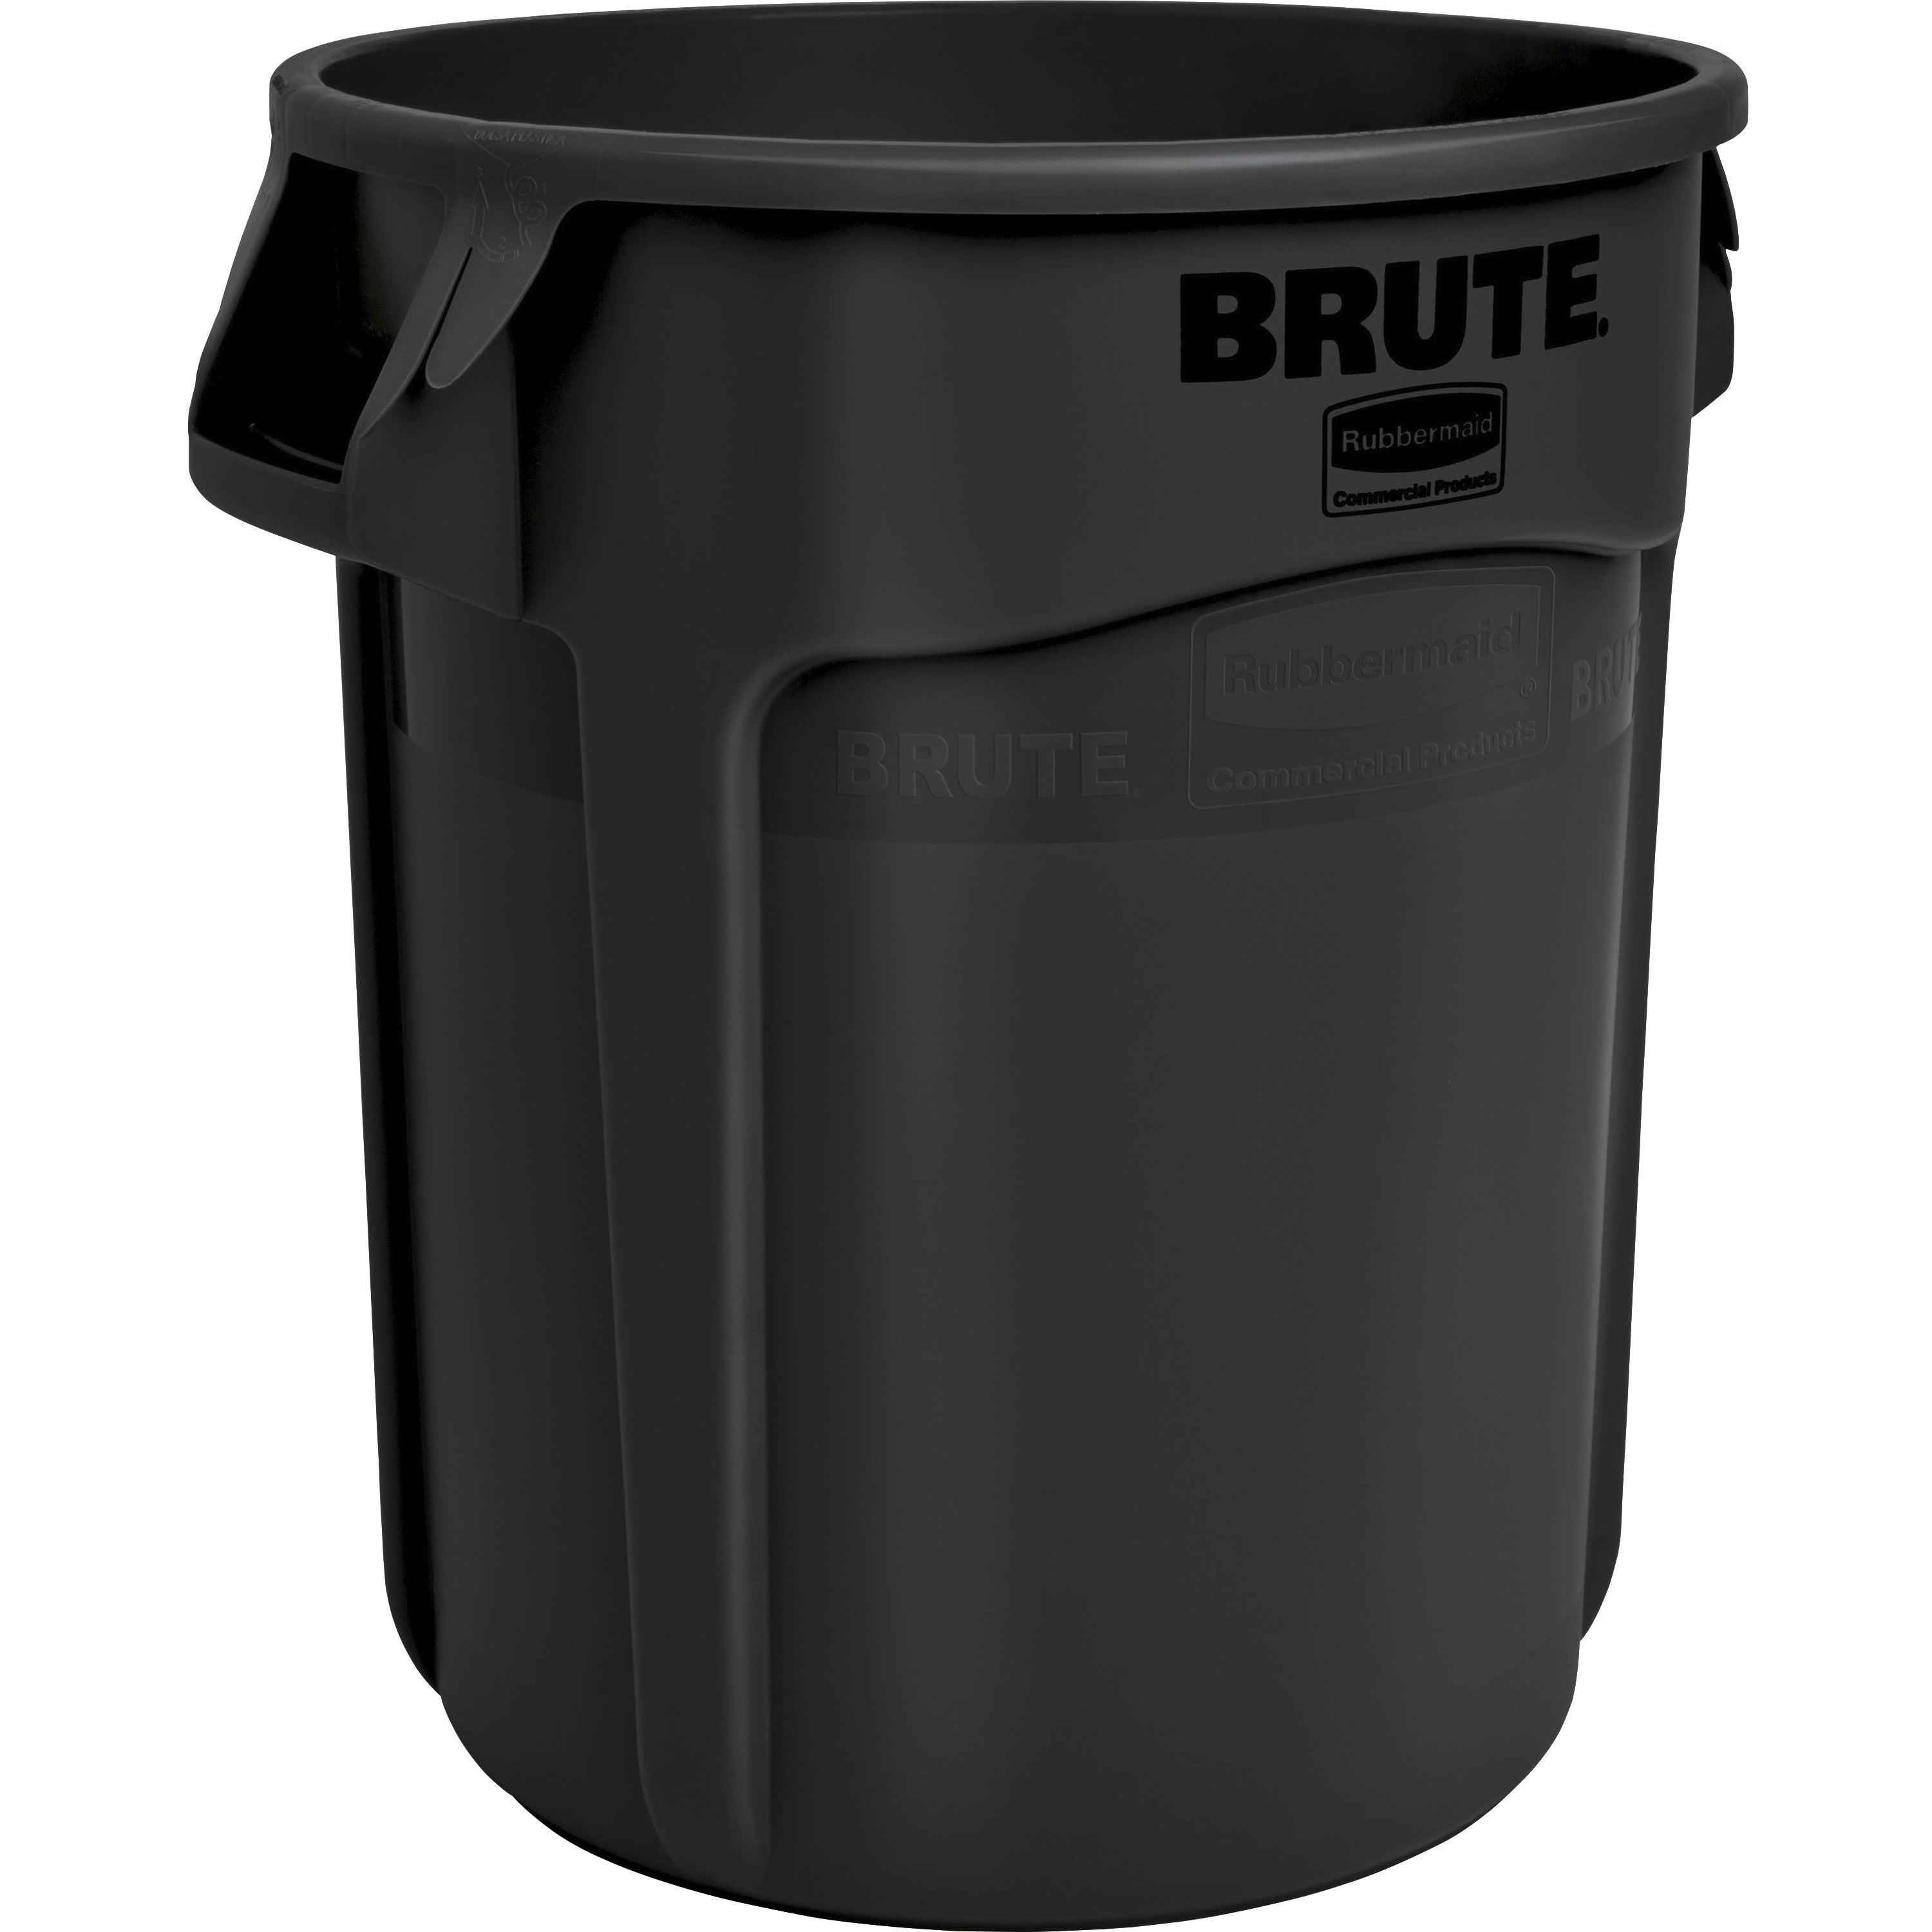 rubbermaid-commercial-vented-brute-20-gallon-container_rcp1779734ct - 1